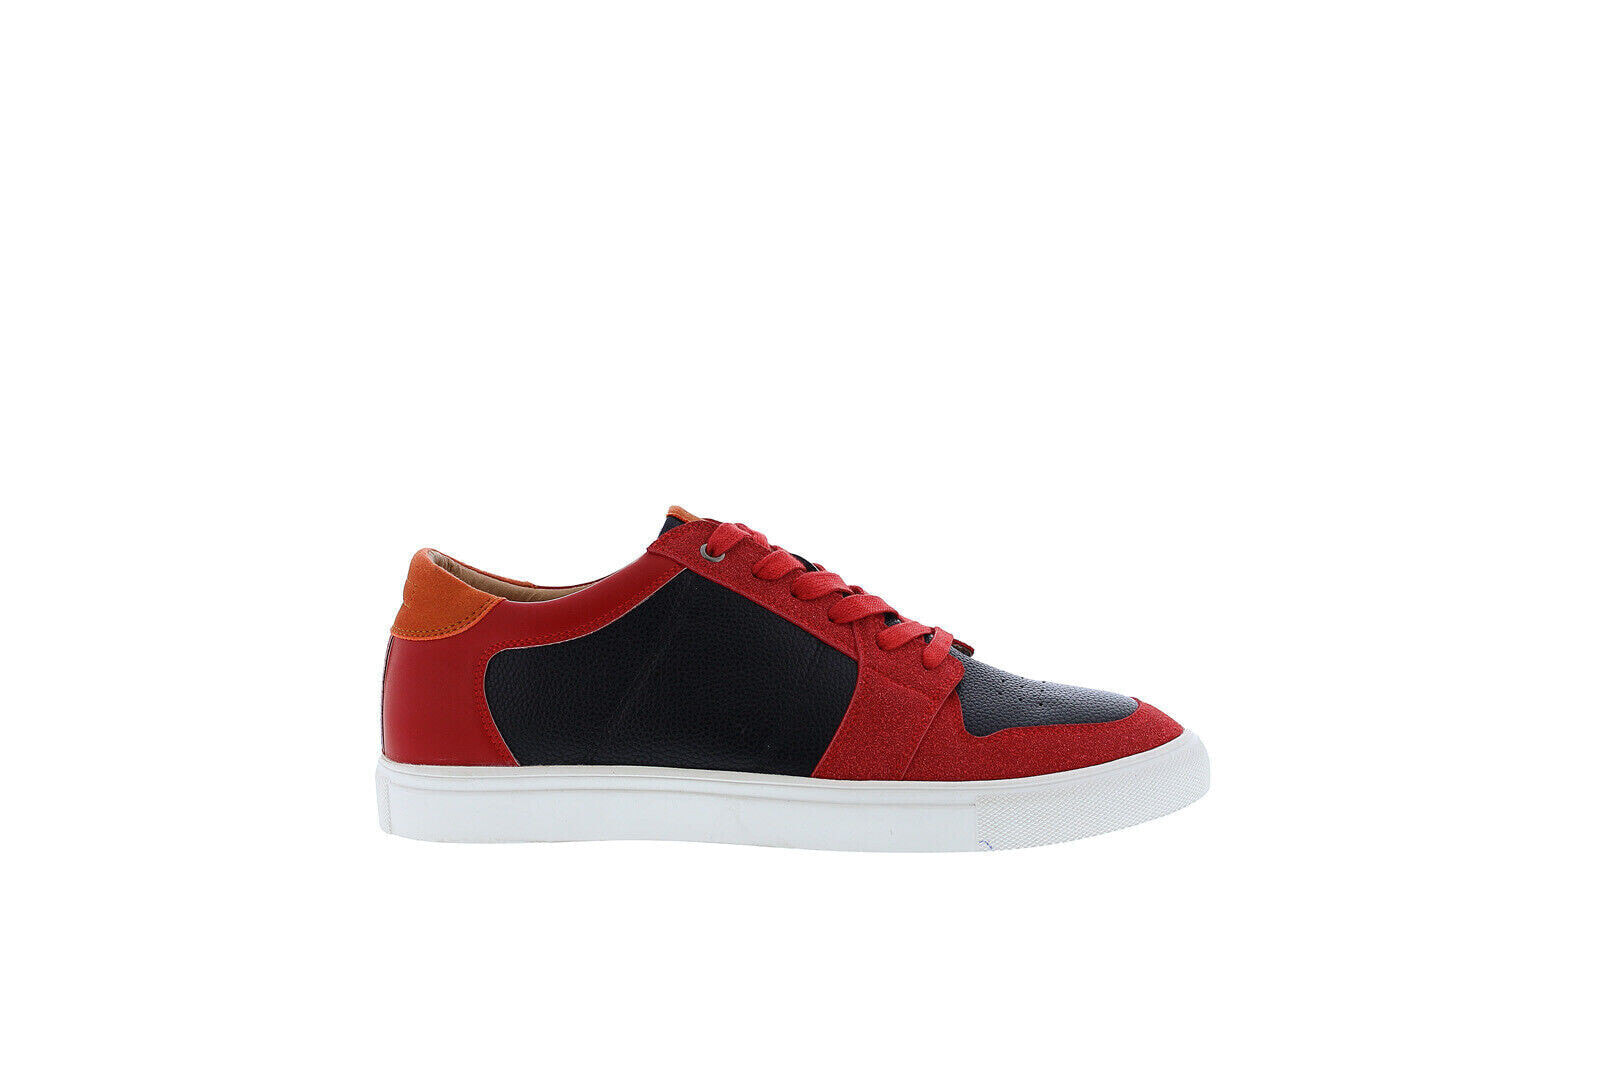 French Connection Simon FC7180L Mens Red Leather Lifestyle Sneakers Shoes 10.5